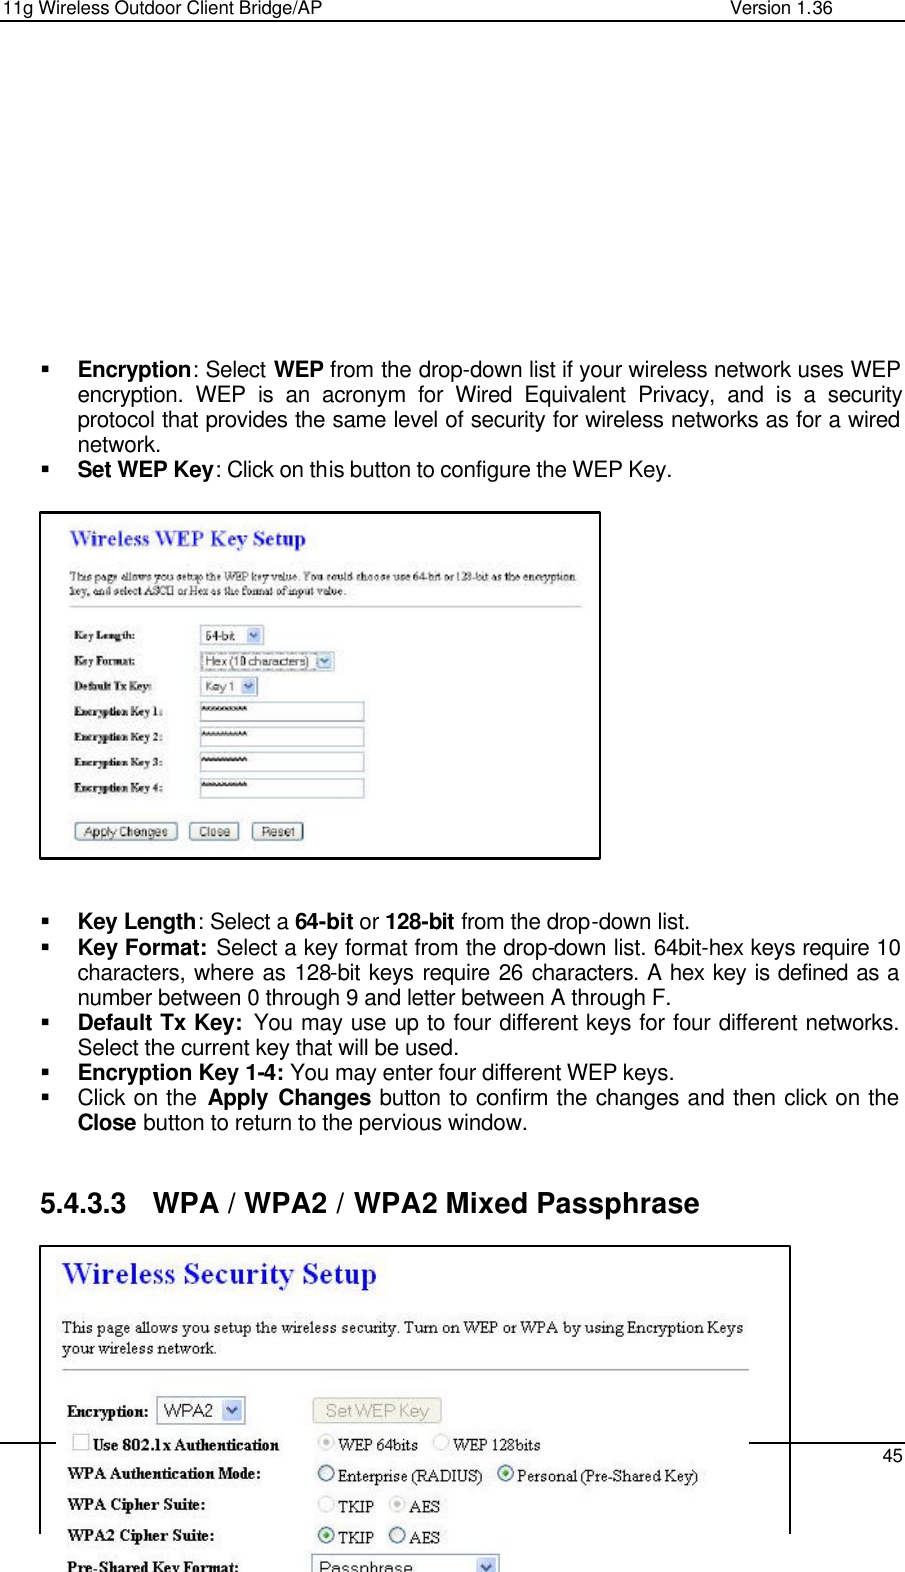 11g Wireless Outdoor Client Bridge/AP                Version 1.36    45            § Encryption: Select WEP from the drop-down list if your wireless network uses WEP encryption. WEP is an acronym for Wired Equivalent Privacy, and is a security protocol that provides the same level of security for wireless networks as for a wired network.  § Set WEP Key: Click on this button to configure the WEP Key.                  § Key Length: Select a 64-bit or 128-bit from the drop-down list.  § Key Format: Select a key format from the drop-down list. 64bit-hex keys require 10 characters, where as 128-bit keys require 26 characters. A hex key is defined as a number between 0 through 9 and letter between A through F. § Default Tx Key:  You may use up to four different keys for four different networks. Select the current key that will be used.  § Encryption Key 1-4: You may enter four different WEP keys.  § Click on the Apply Changes button to confirm the changes and then click on the Close button to return to the pervious window.    5.4.3.3 WPA / WPA2 / WPA2 Mixed Passphrase        